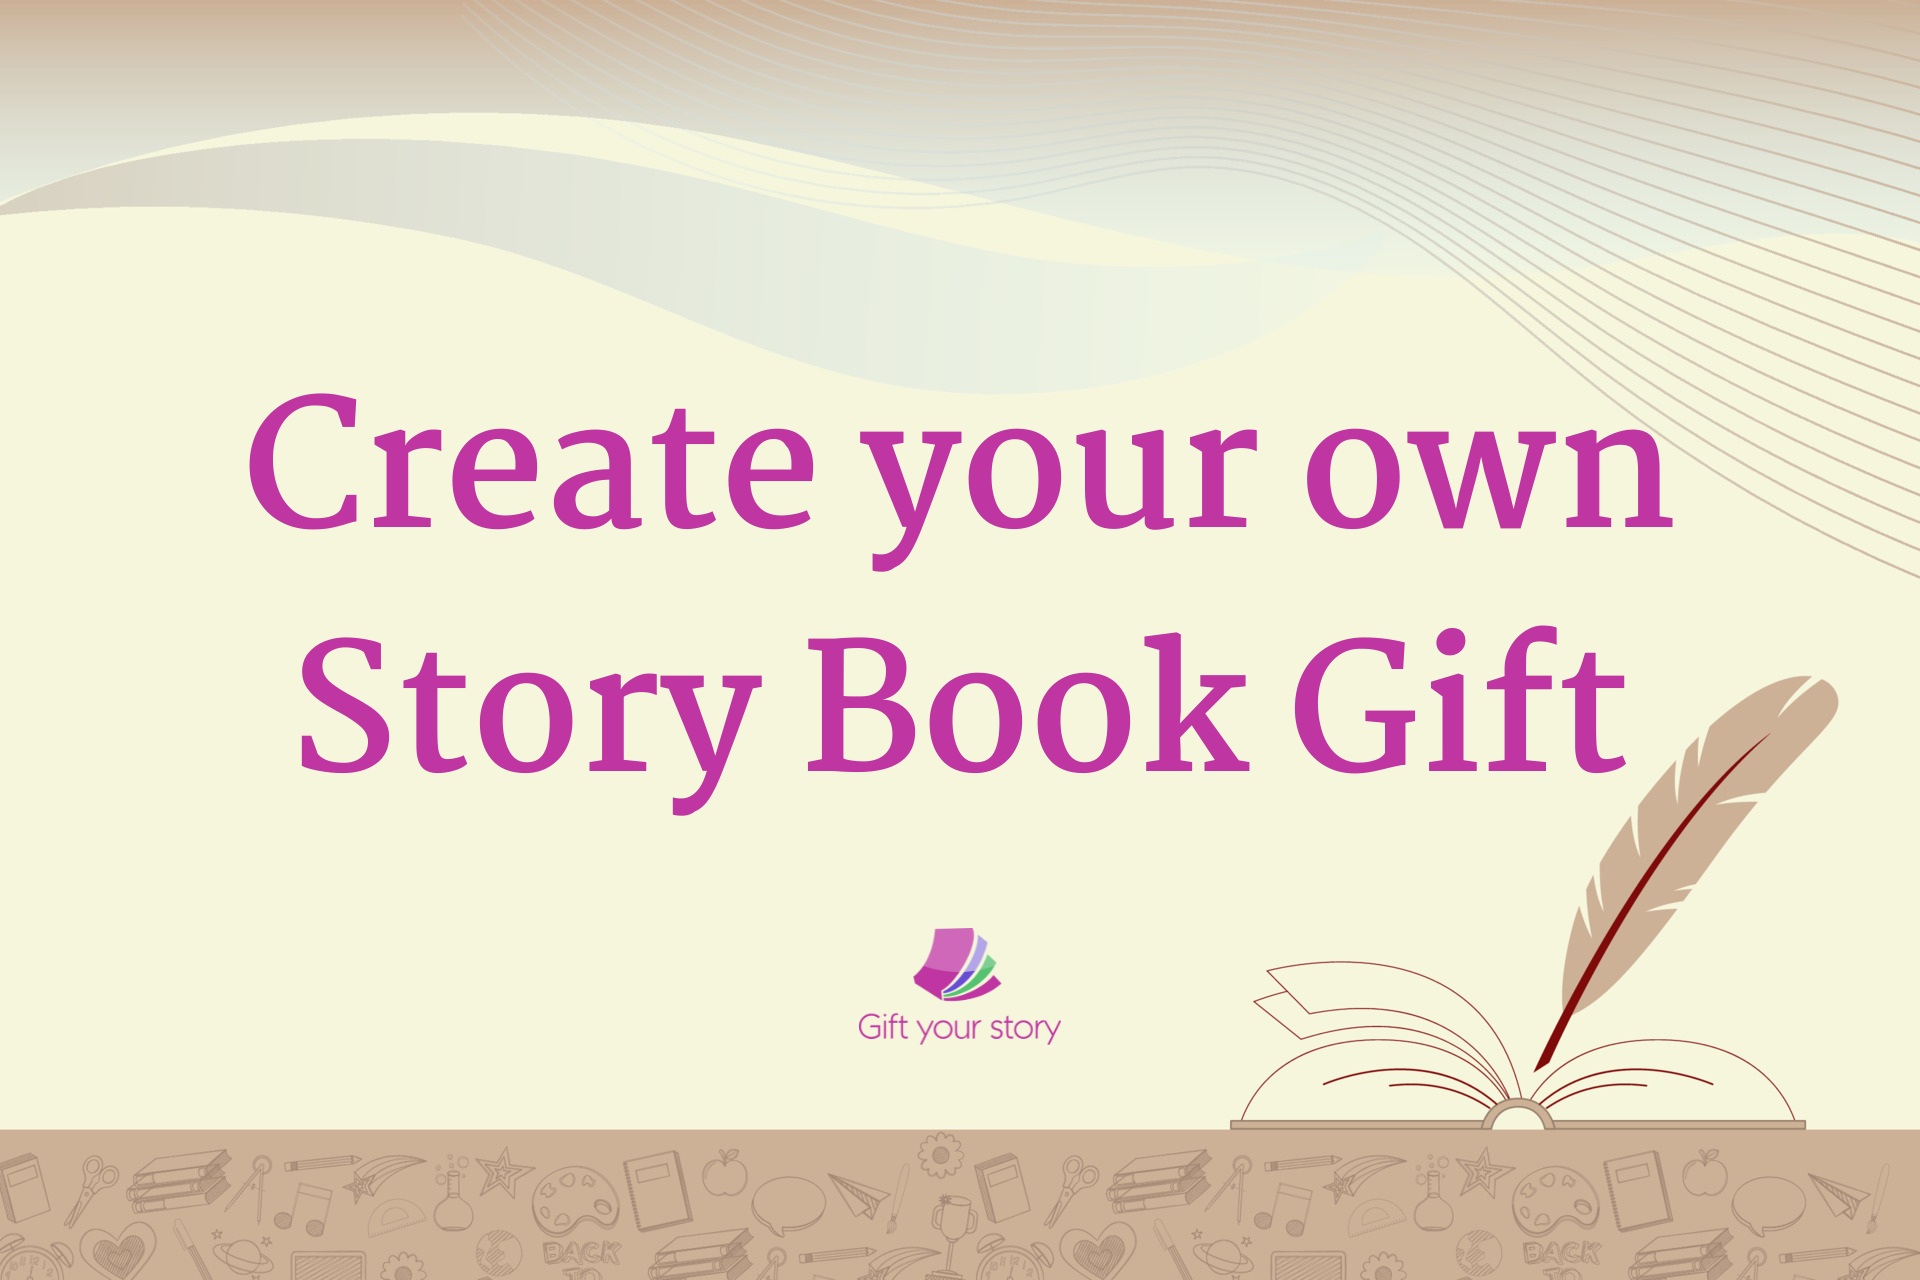 Create your own story book gift - Gift Your Story